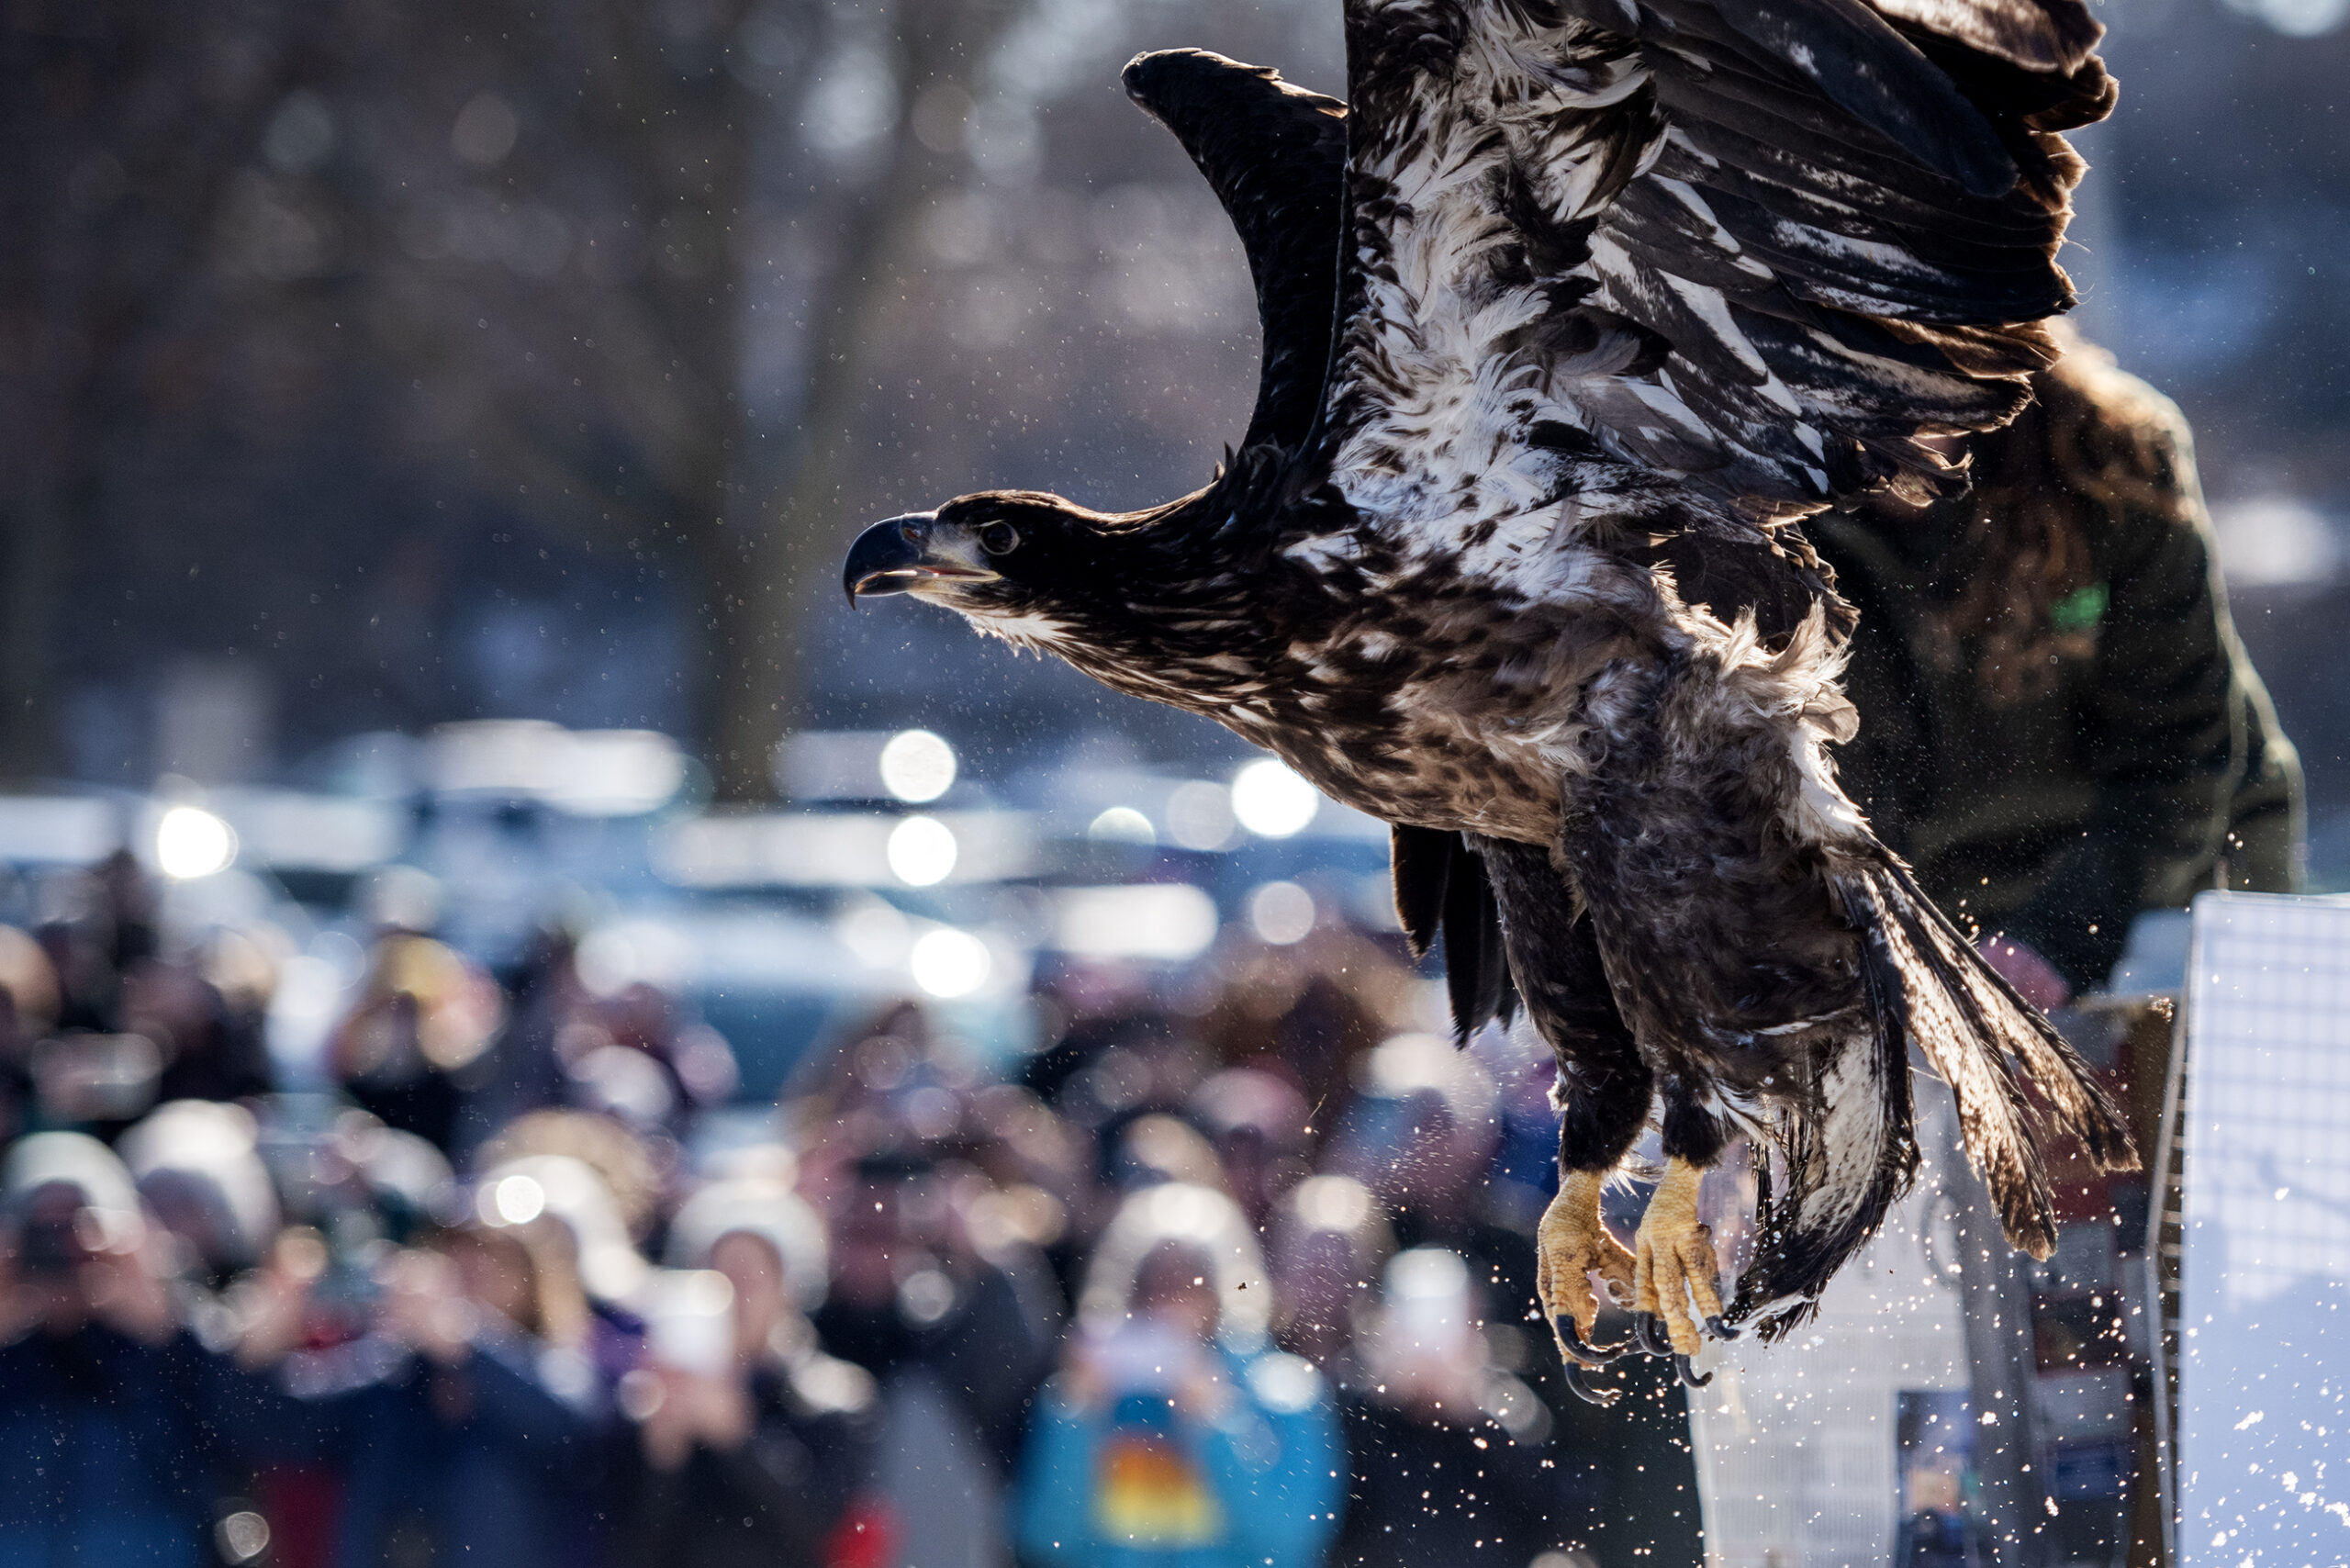 An eagle is seen mid-flight close-up from the side.